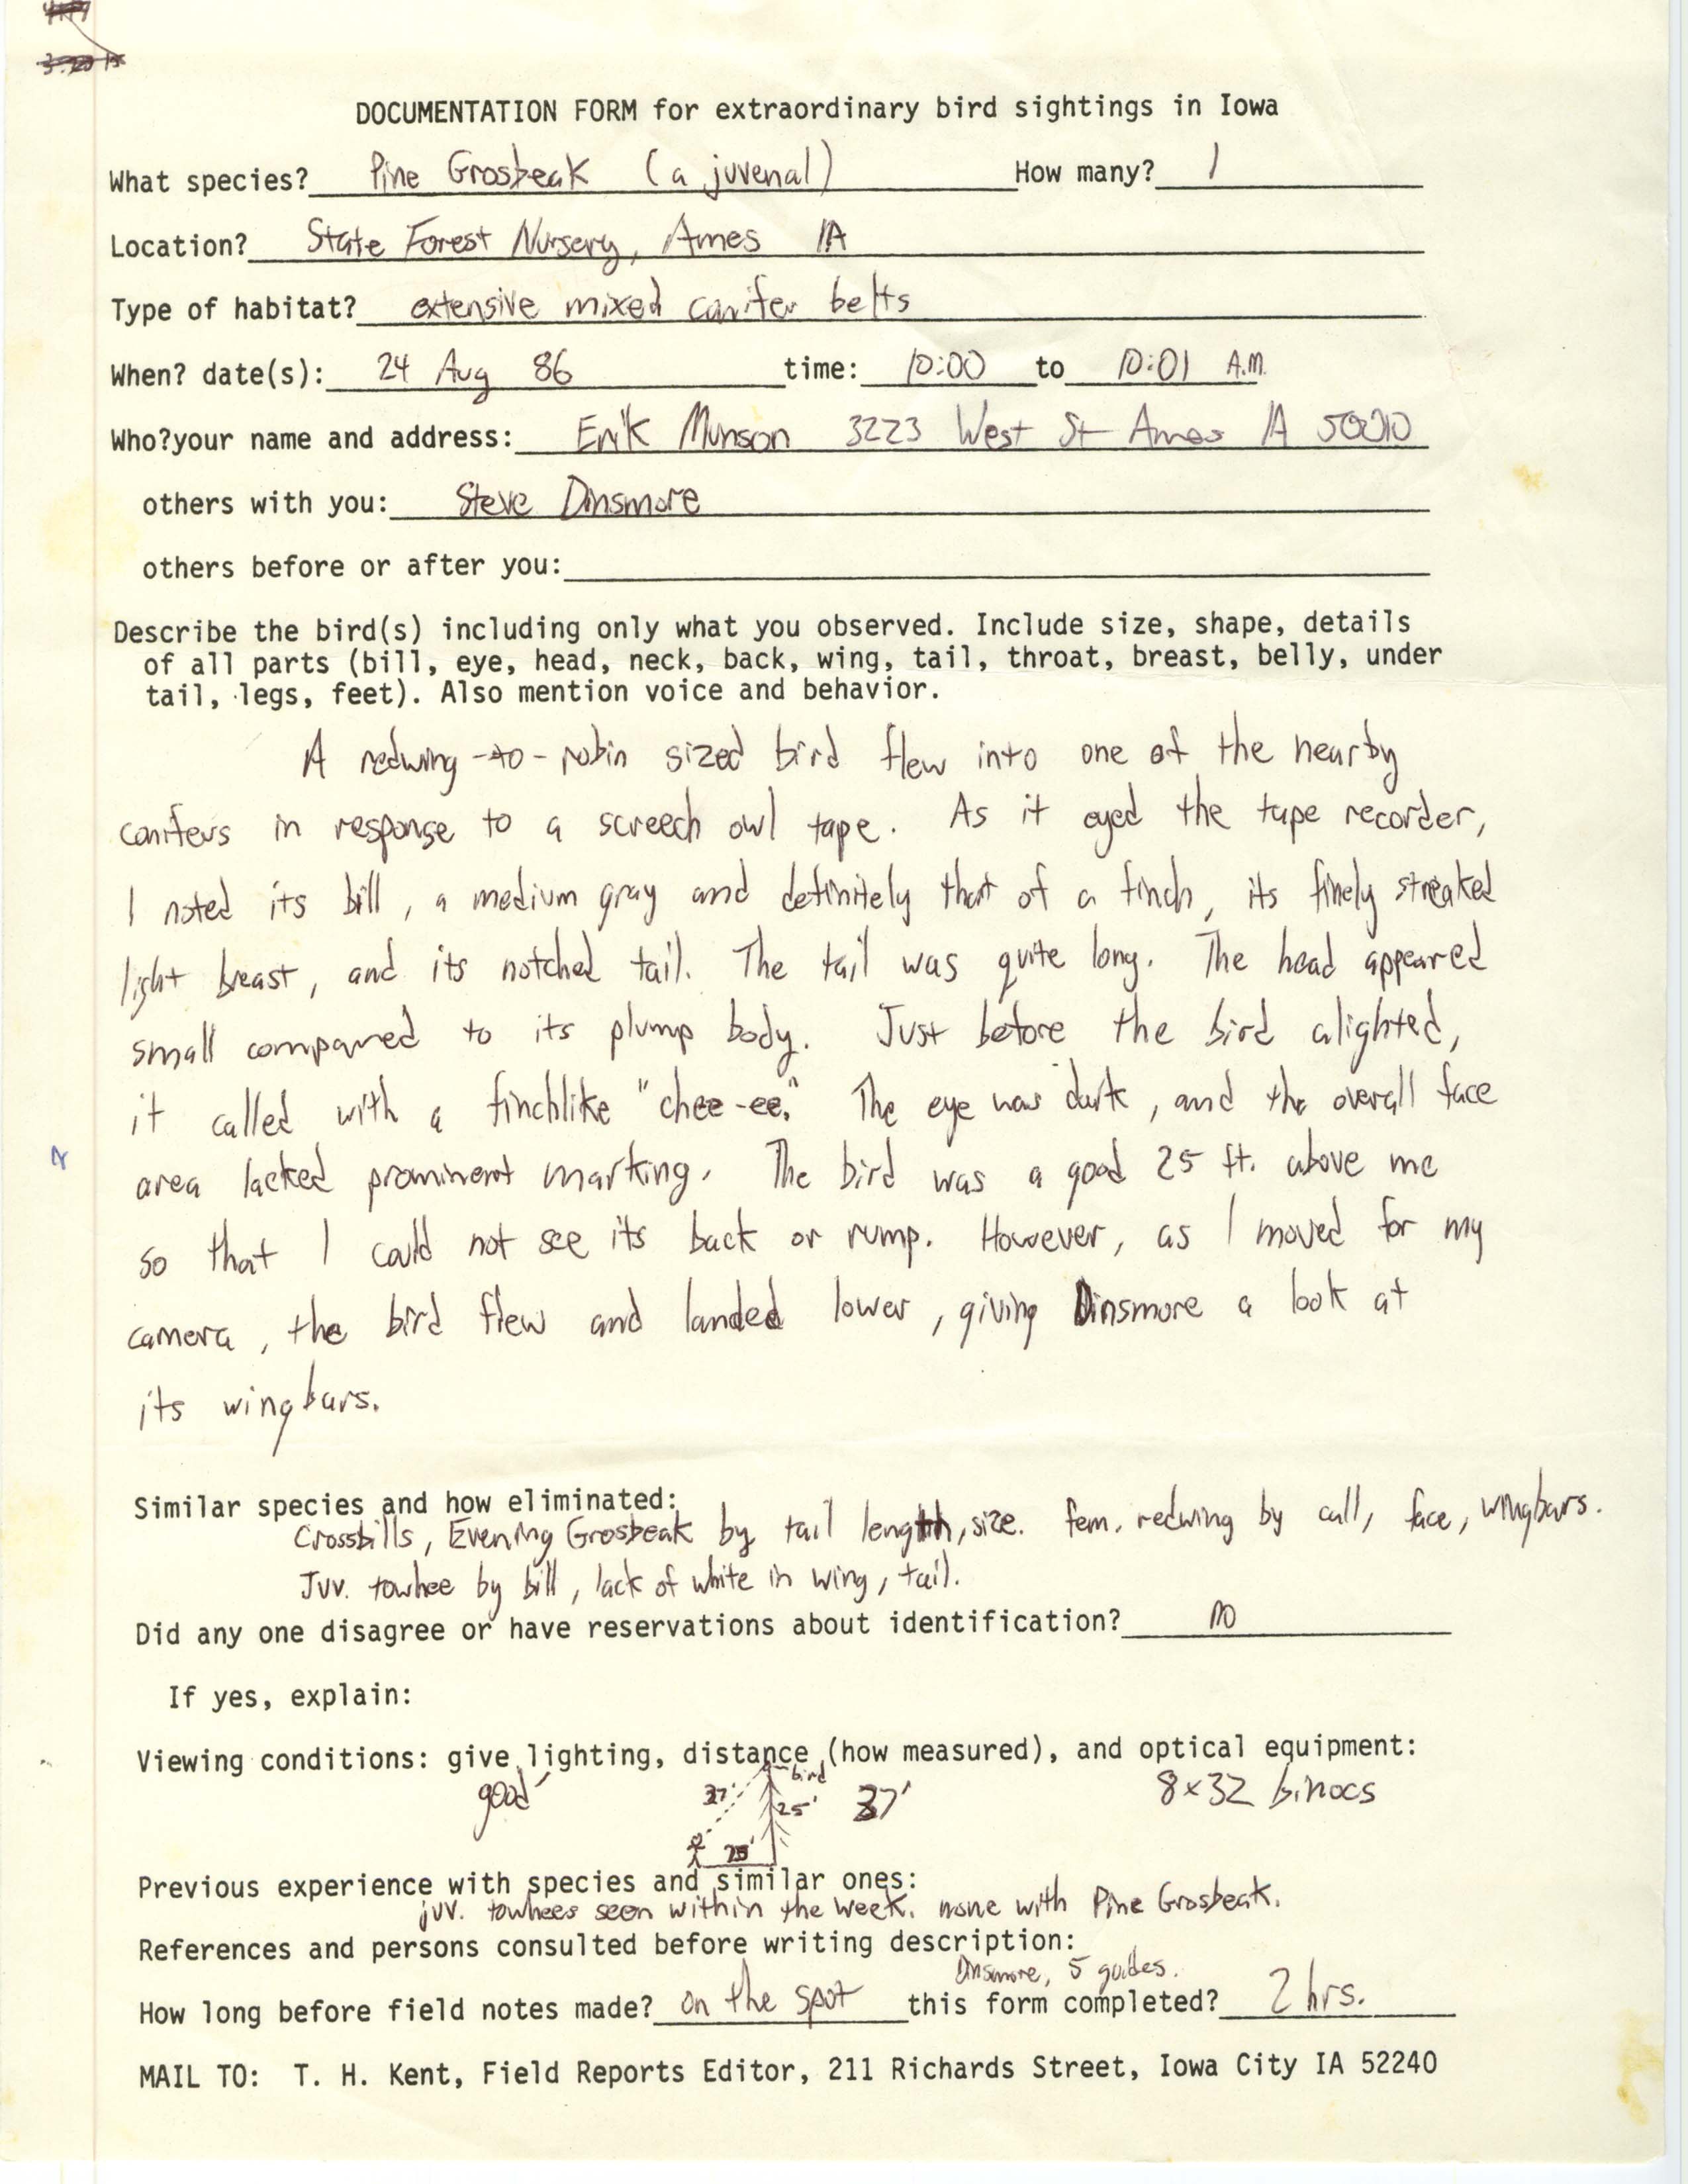 Rare bird documentation form for Pine Grosbeak at State Forest Nursery in Ames, 1986